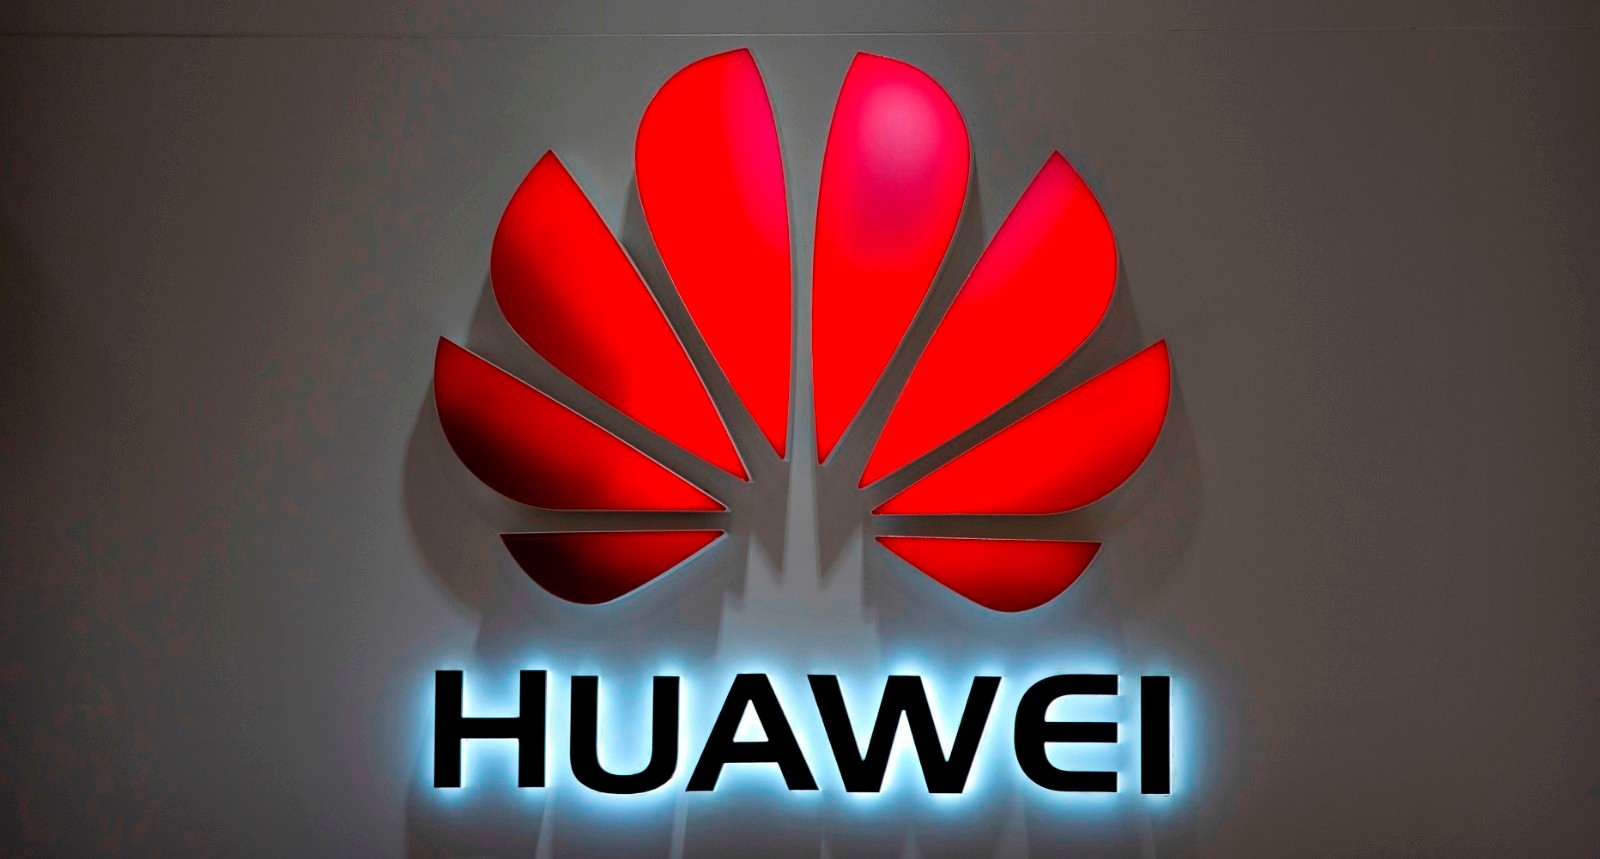 FILE - In this July 4, 2018, file photo, the Huawei logo is seen at a Huawei store at a shopping mall in Beijing. Canadian authorities said Wednesday, Dec. 5, 2018,  that they have arrested the chief financial officer of China's Huawei Technologies for possible extradition to the United States. Justice Department spokesman Ian McLeod said Meng Wanzhou was detained in Vancouver, British Columbia, on Saturday, Dec. 2.(AP Photo/Mark Schiefelbein, File)